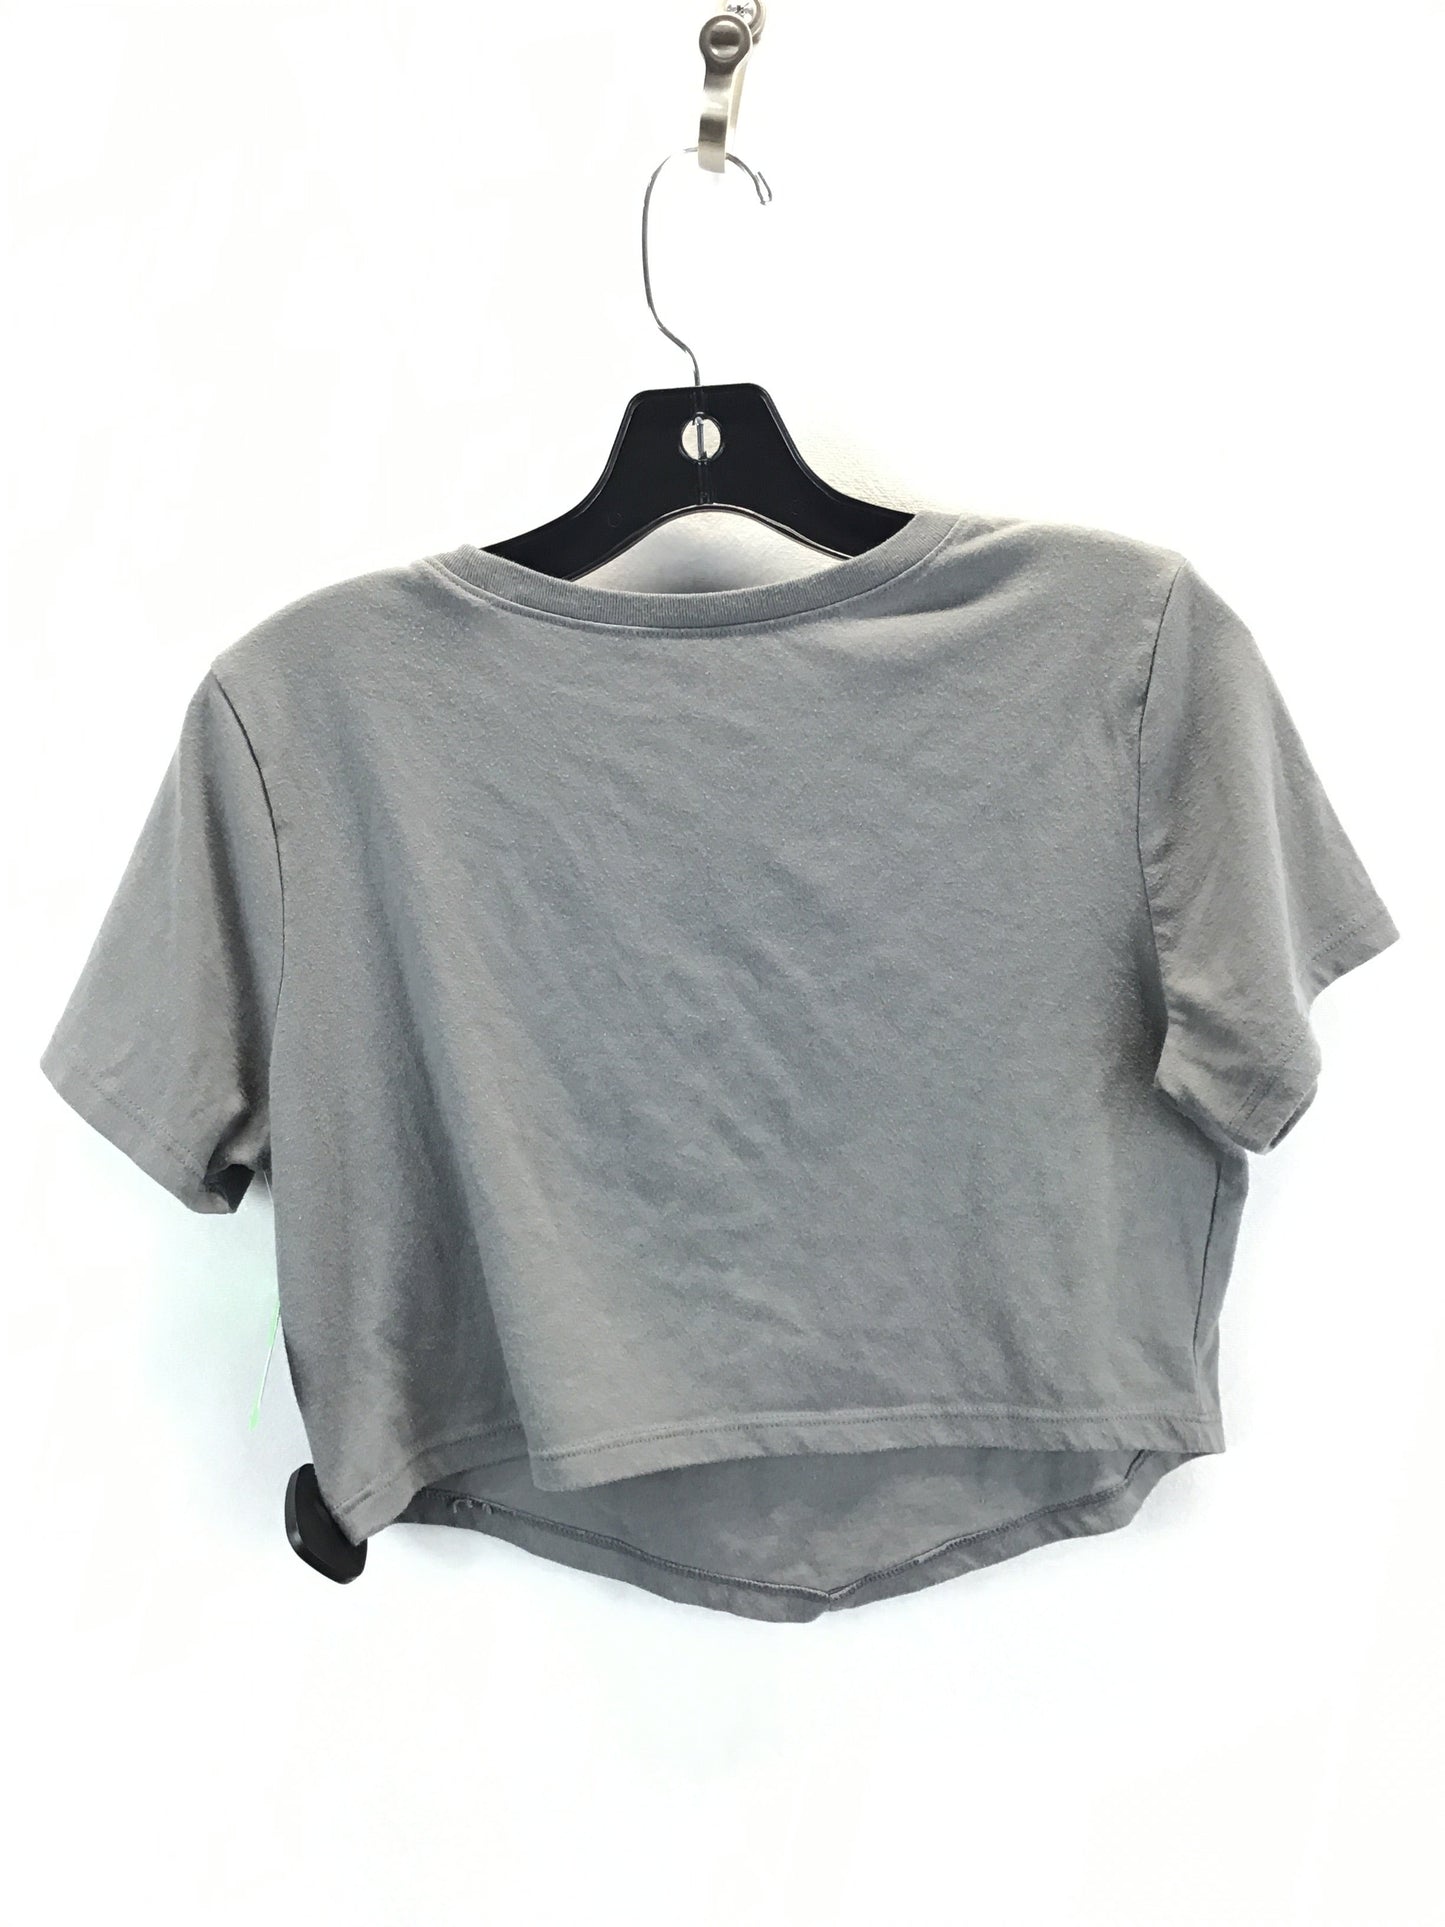 Grey Top Short Sleeve Clothes Mentor, Size L